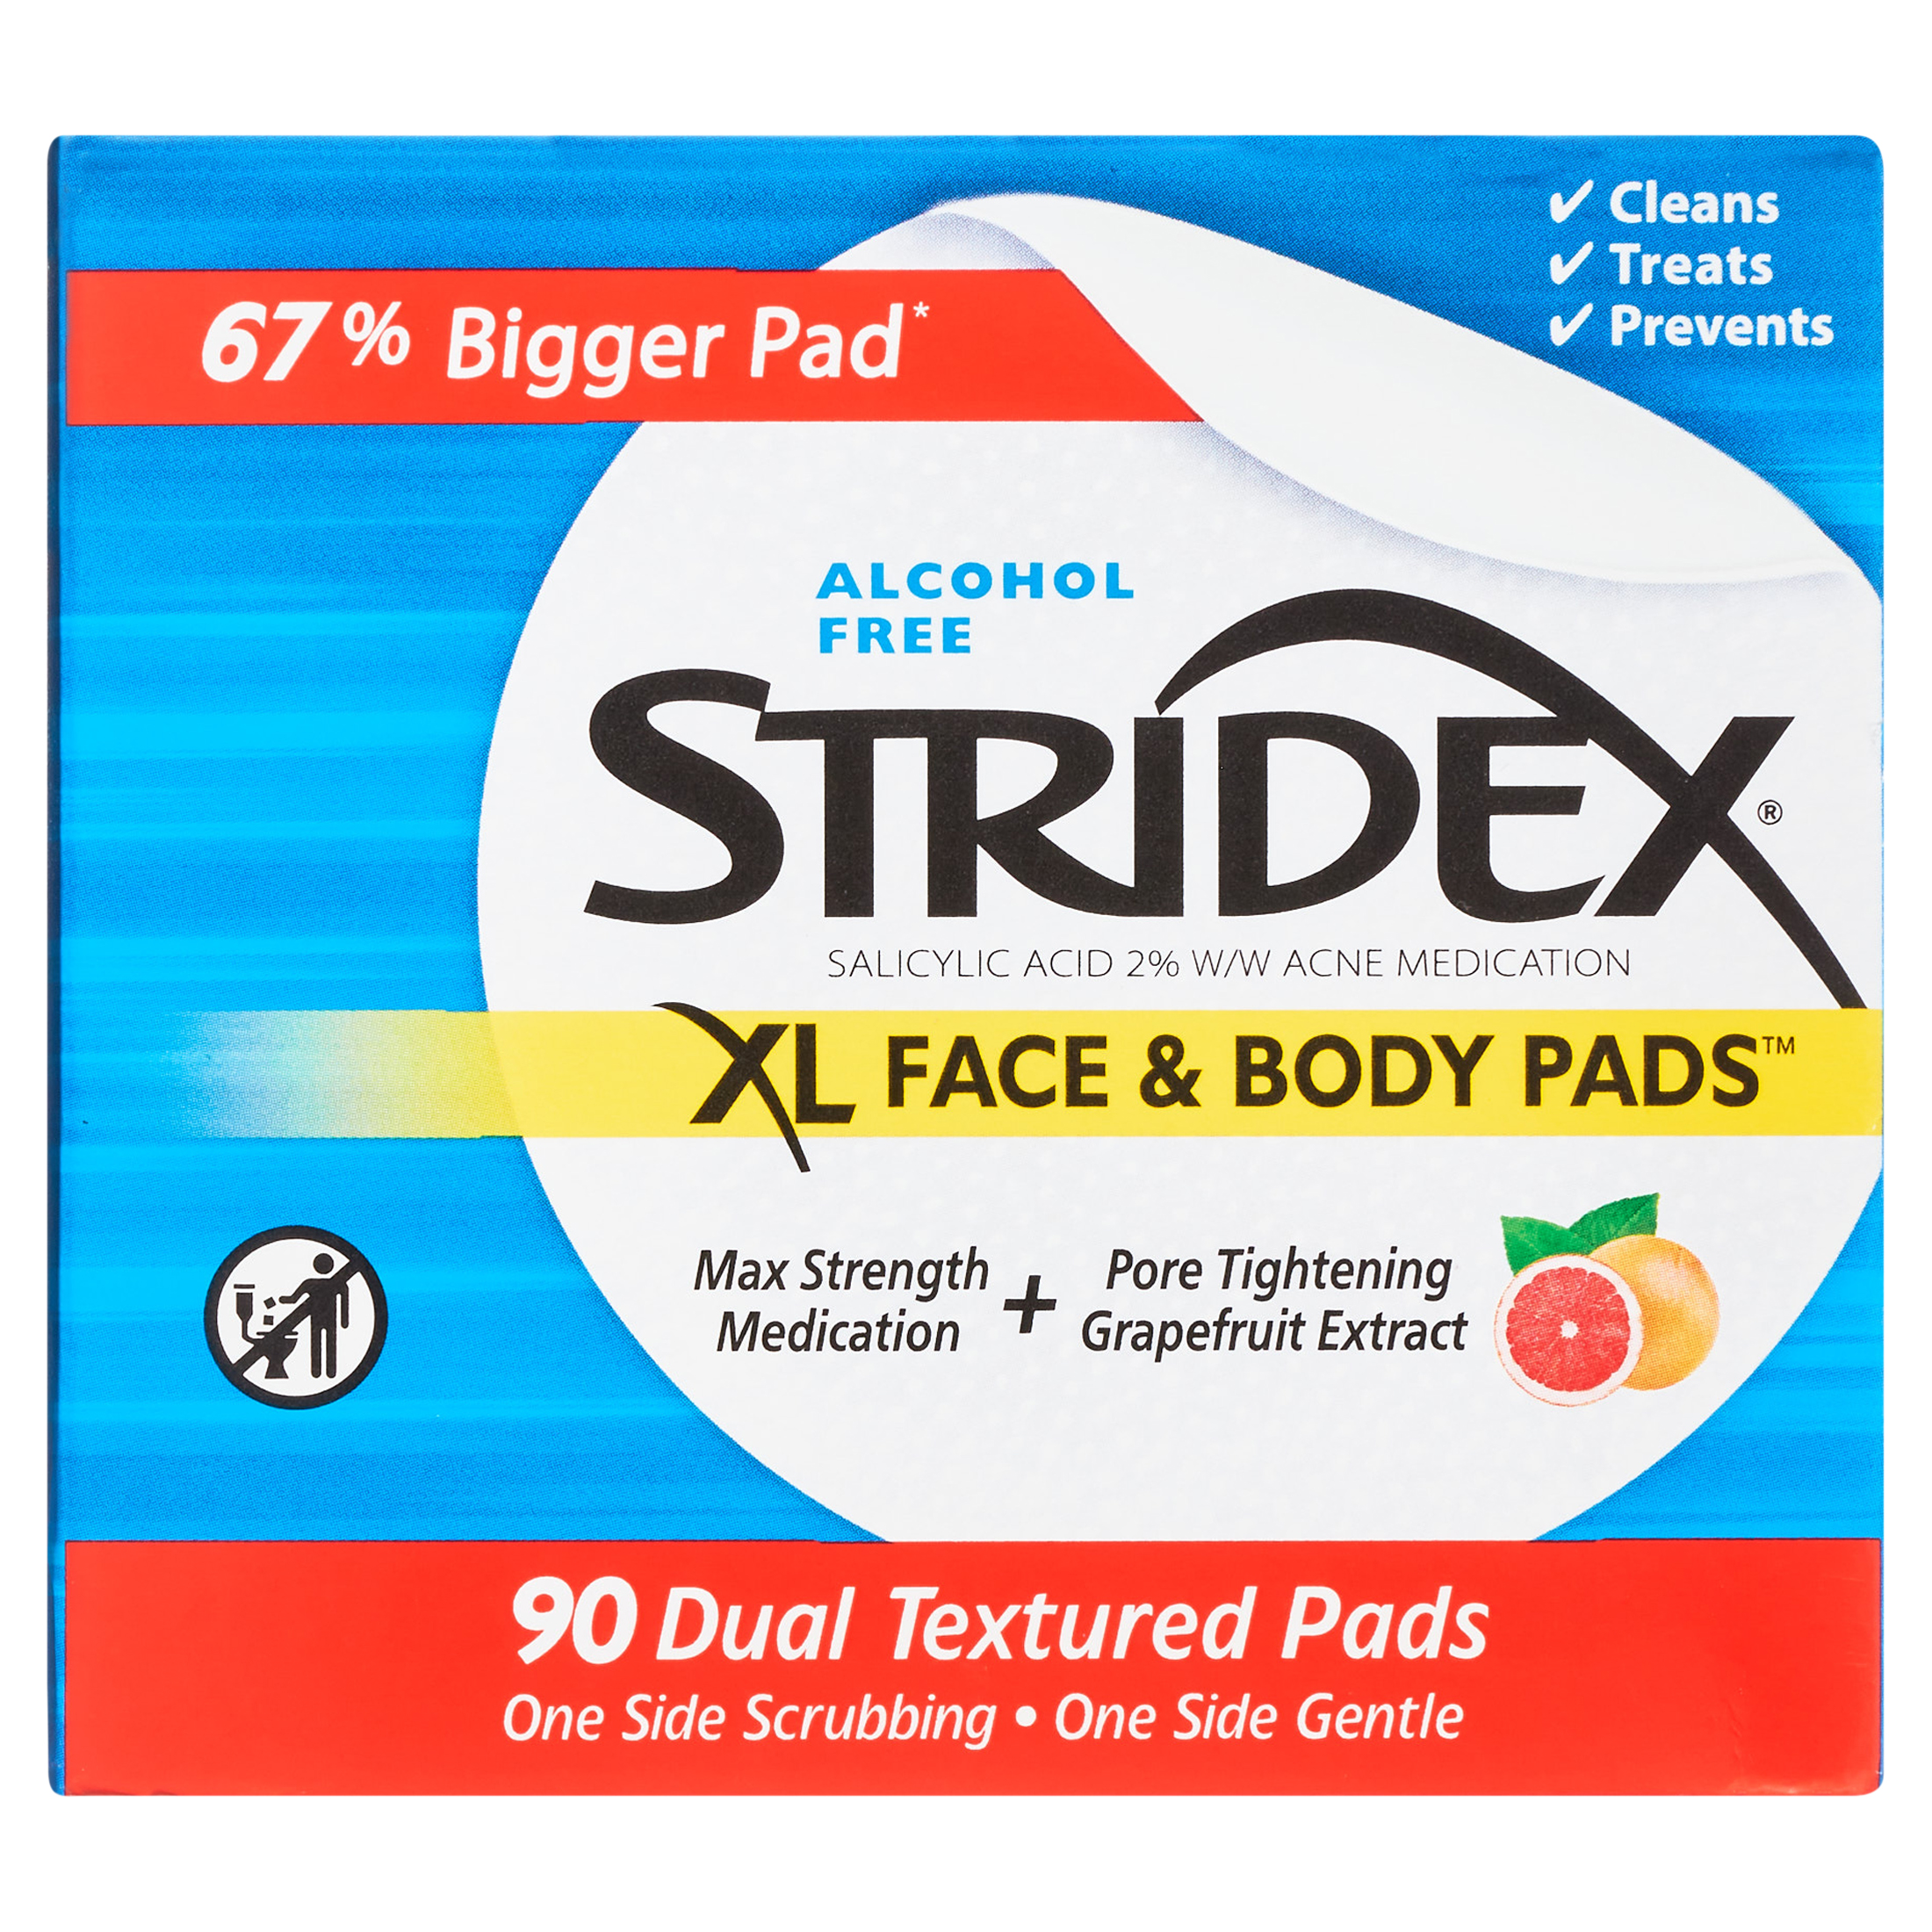 Stridex XL Acne Pads for Face and Body with Salicylic Acid, Alcohol Free, 90 Ct - image 1 of 12